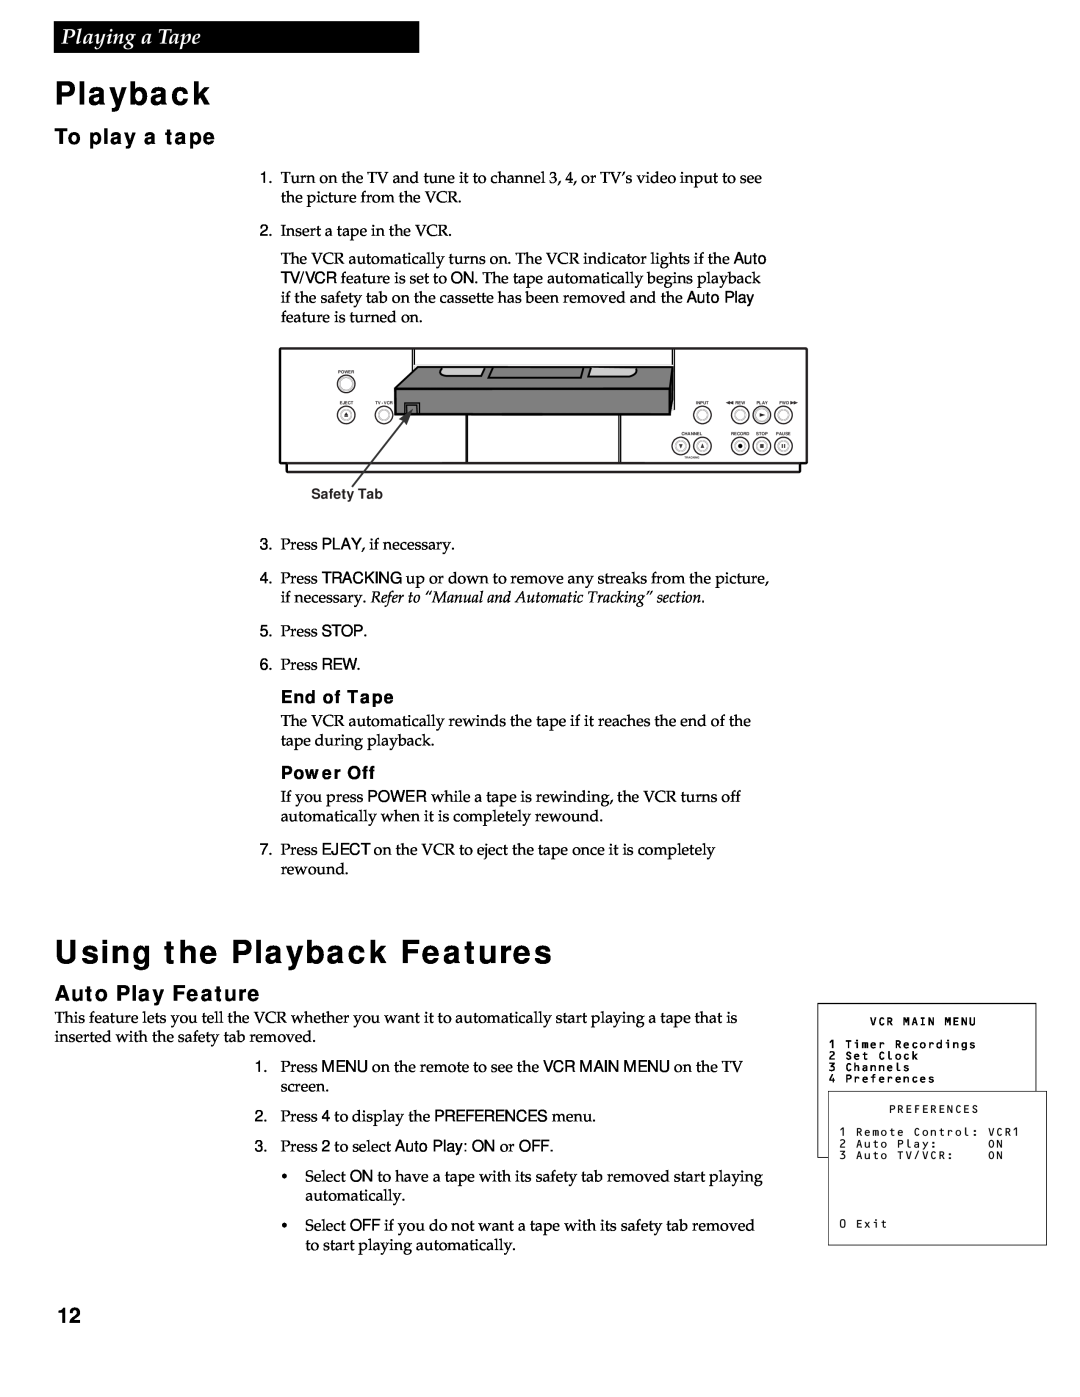 RCA VR336 manual Using the Playback Features, Playing a Tape, To play a tape, Auto Play Feature 